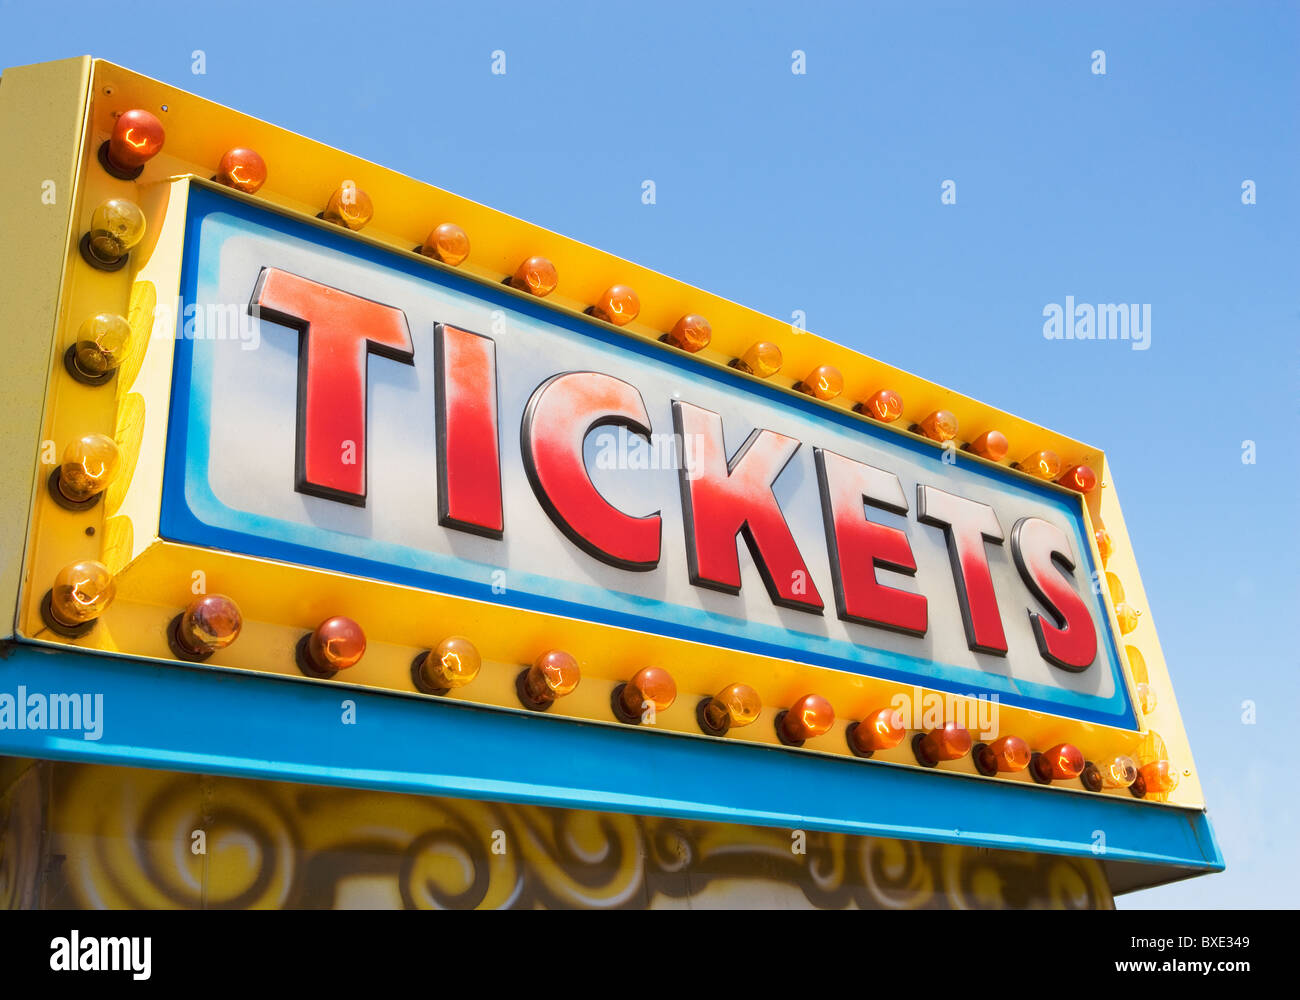 Tickets sign at fairgrounds Stock Photo Alamy